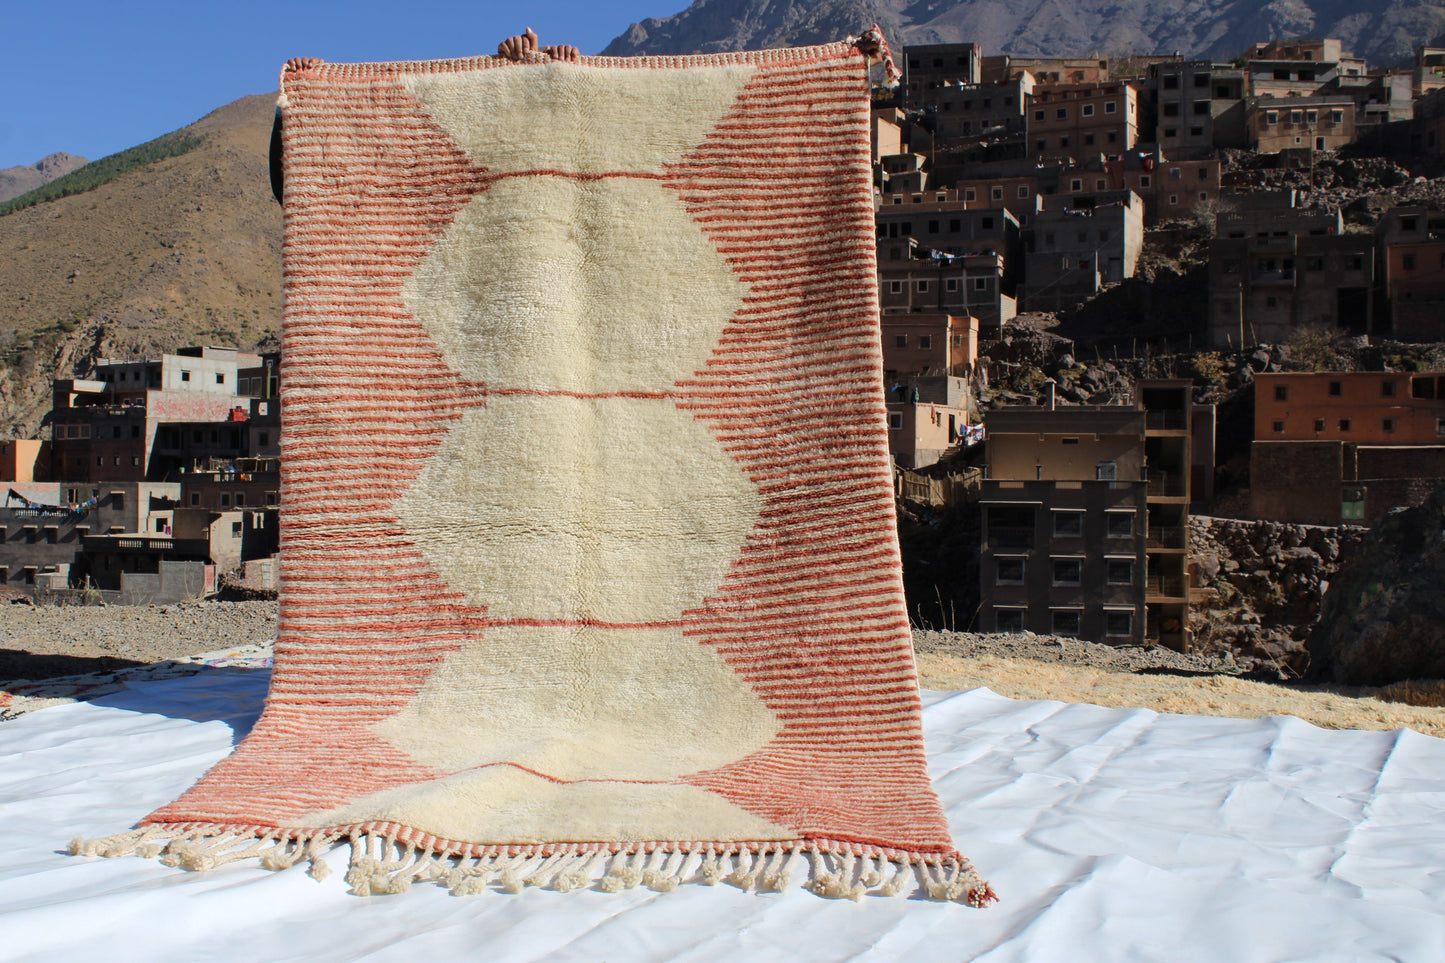 Beni Ourain rugs originate from the Atlas Mountains of Morocco and are characterized by their distinctive, neutral-toned, and geometric designs. These handwoven rugs often feature a plush pile and are made by the Berber tribes,  size is 255x150 cm